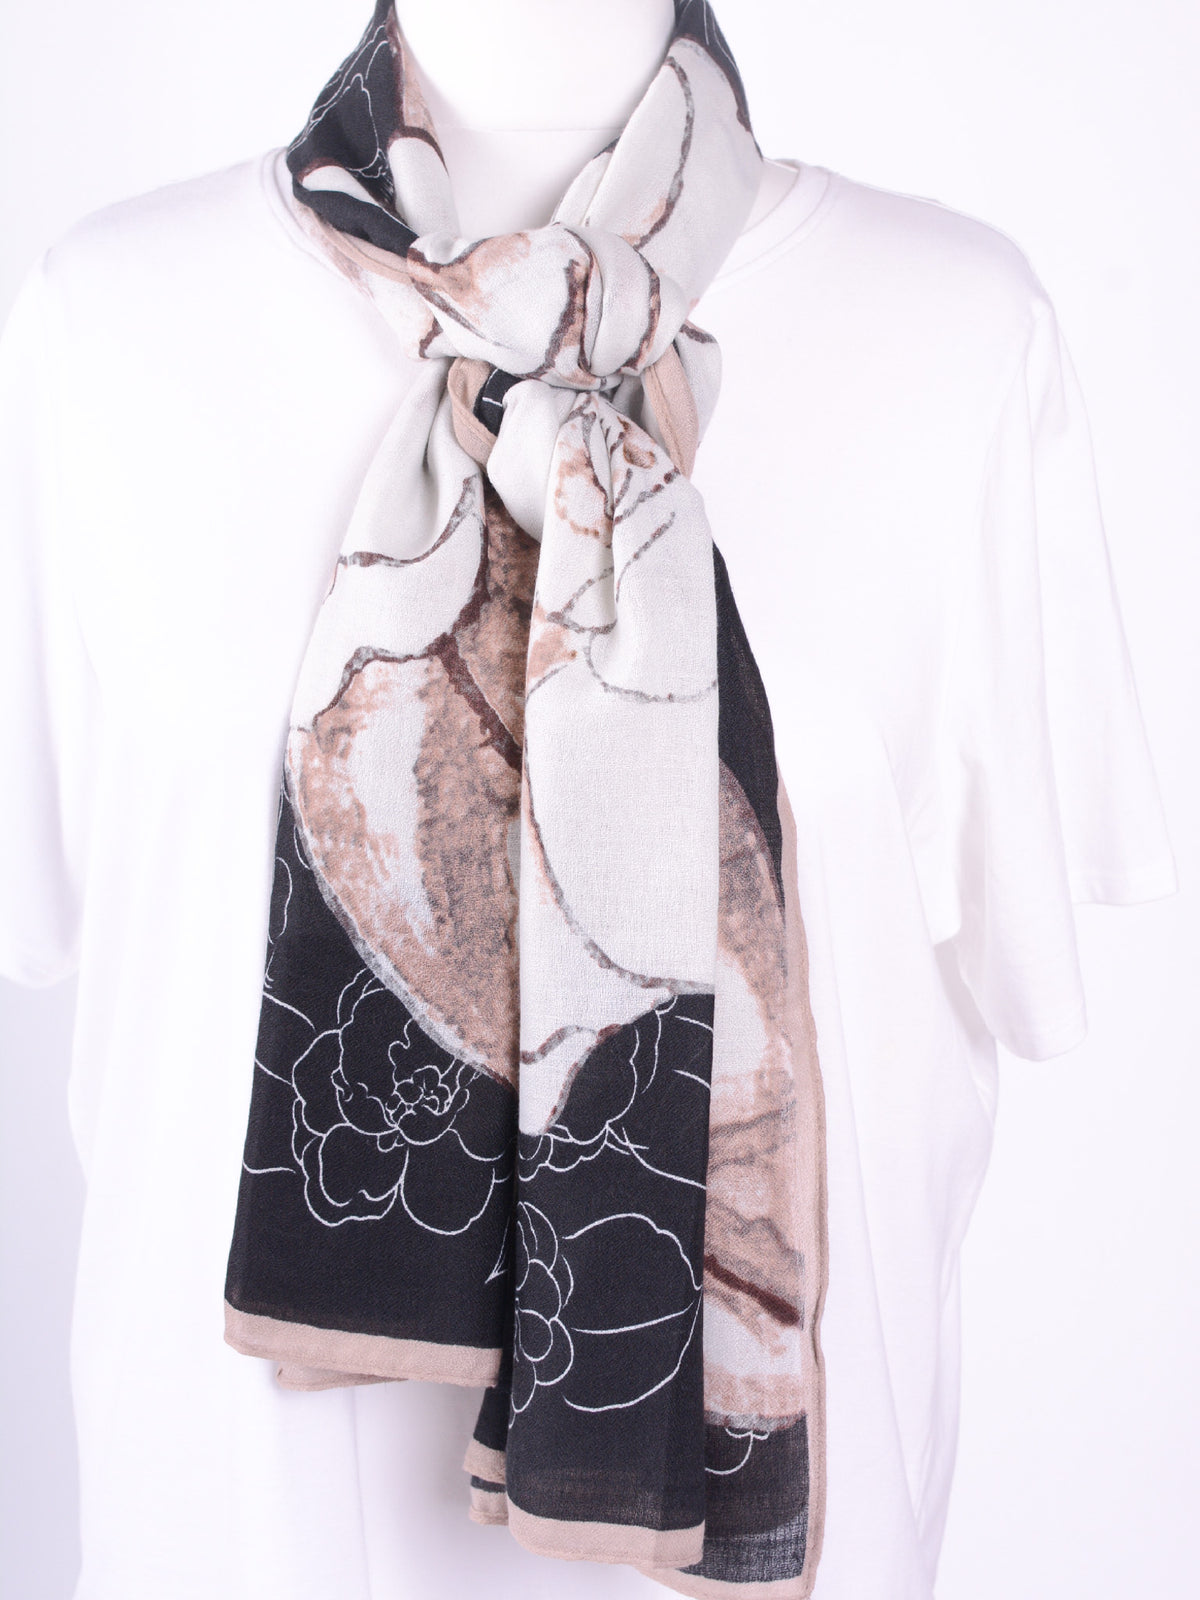 Browns Flower Scarf - BWNSC1, scarf, Pure Plus Clothing, Lagenlook Clothing, Plus Size Fashion, Over 50 Fashion